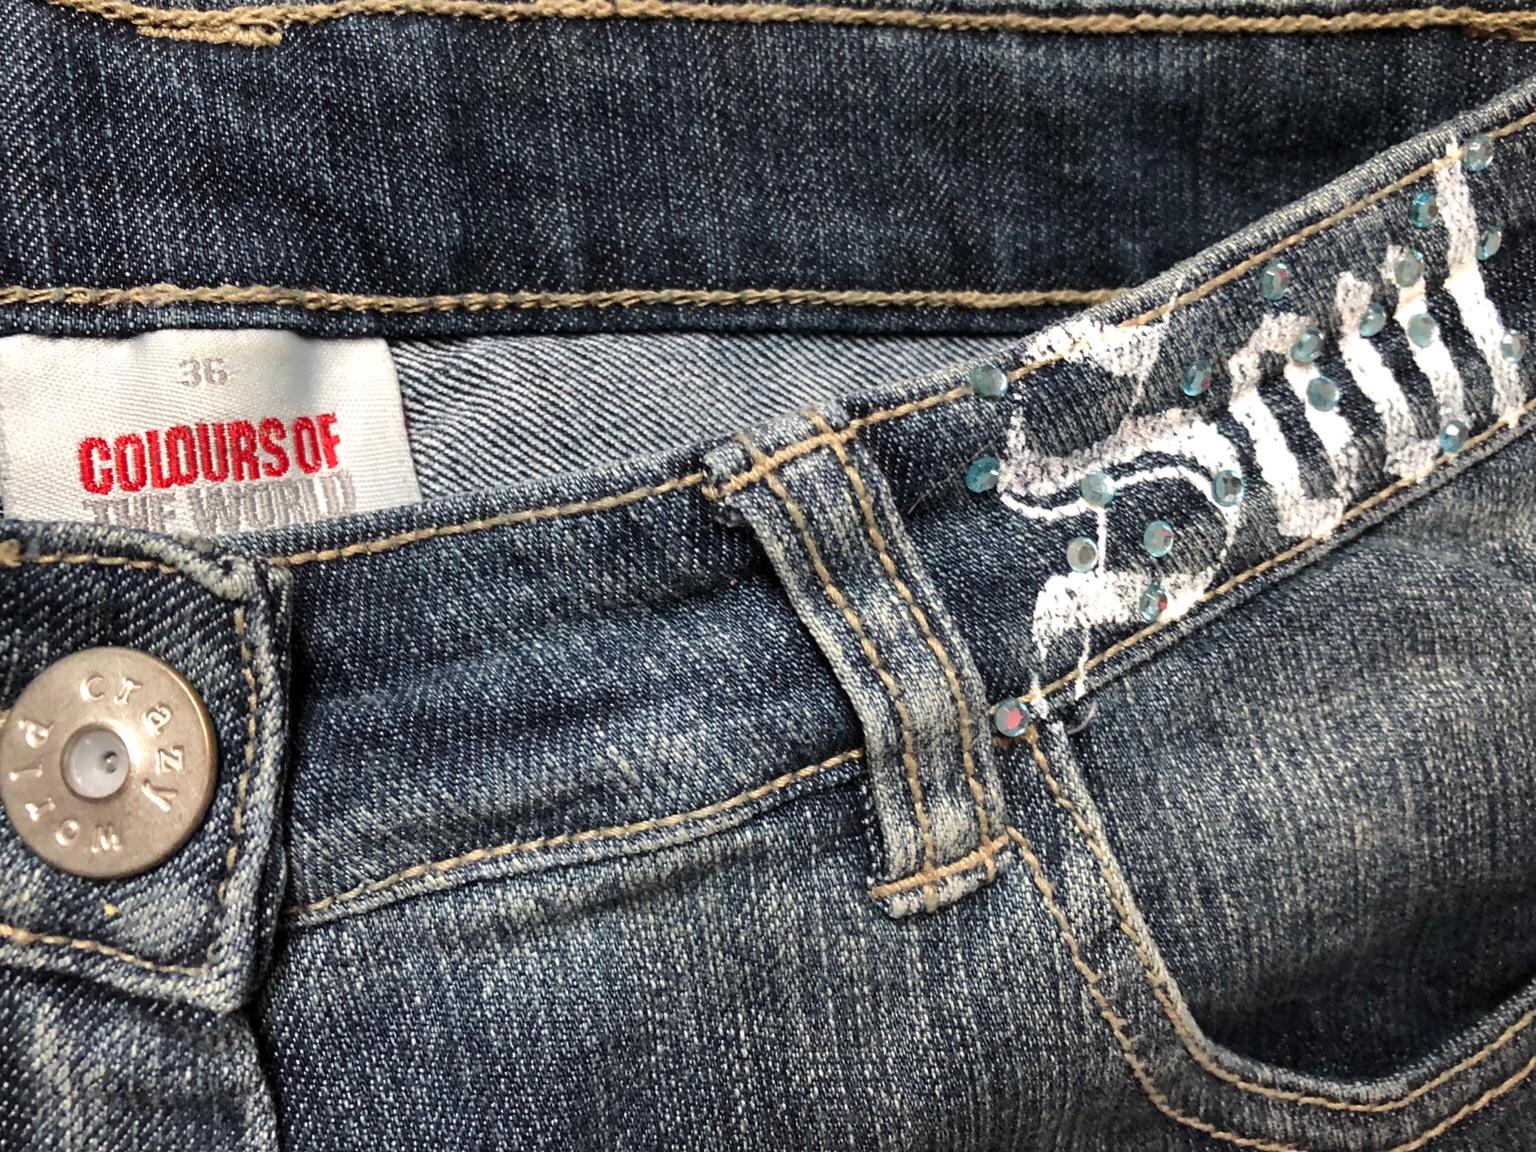 Jeans 7 8 Sommer 36 In Forchheim For 5 00 For Sale Shpock